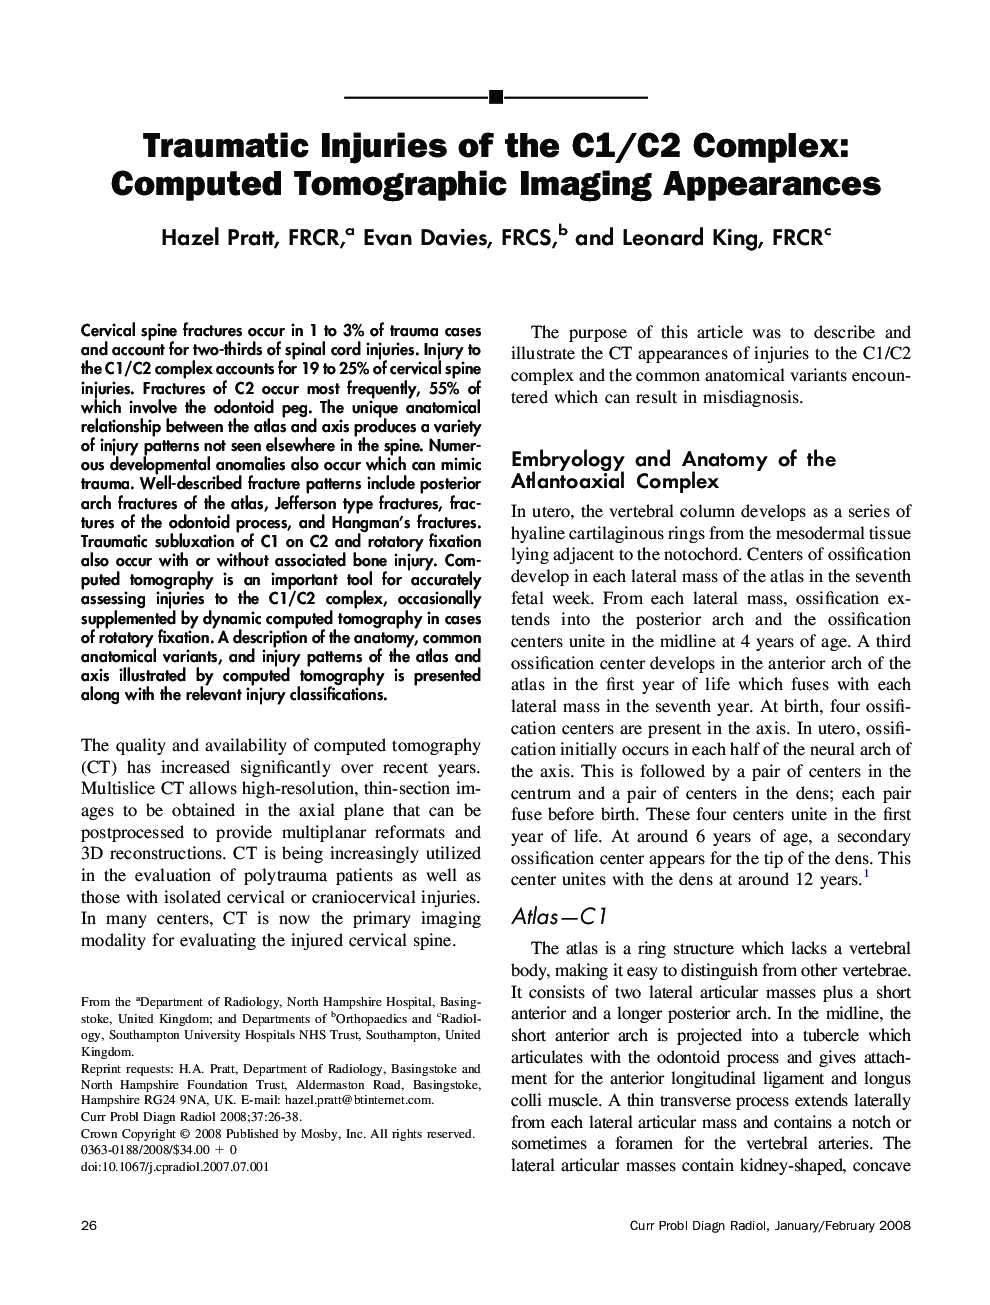 Traumatic Injuries of the C1/C2 Complex: Computed Tomographic Imaging Appearances